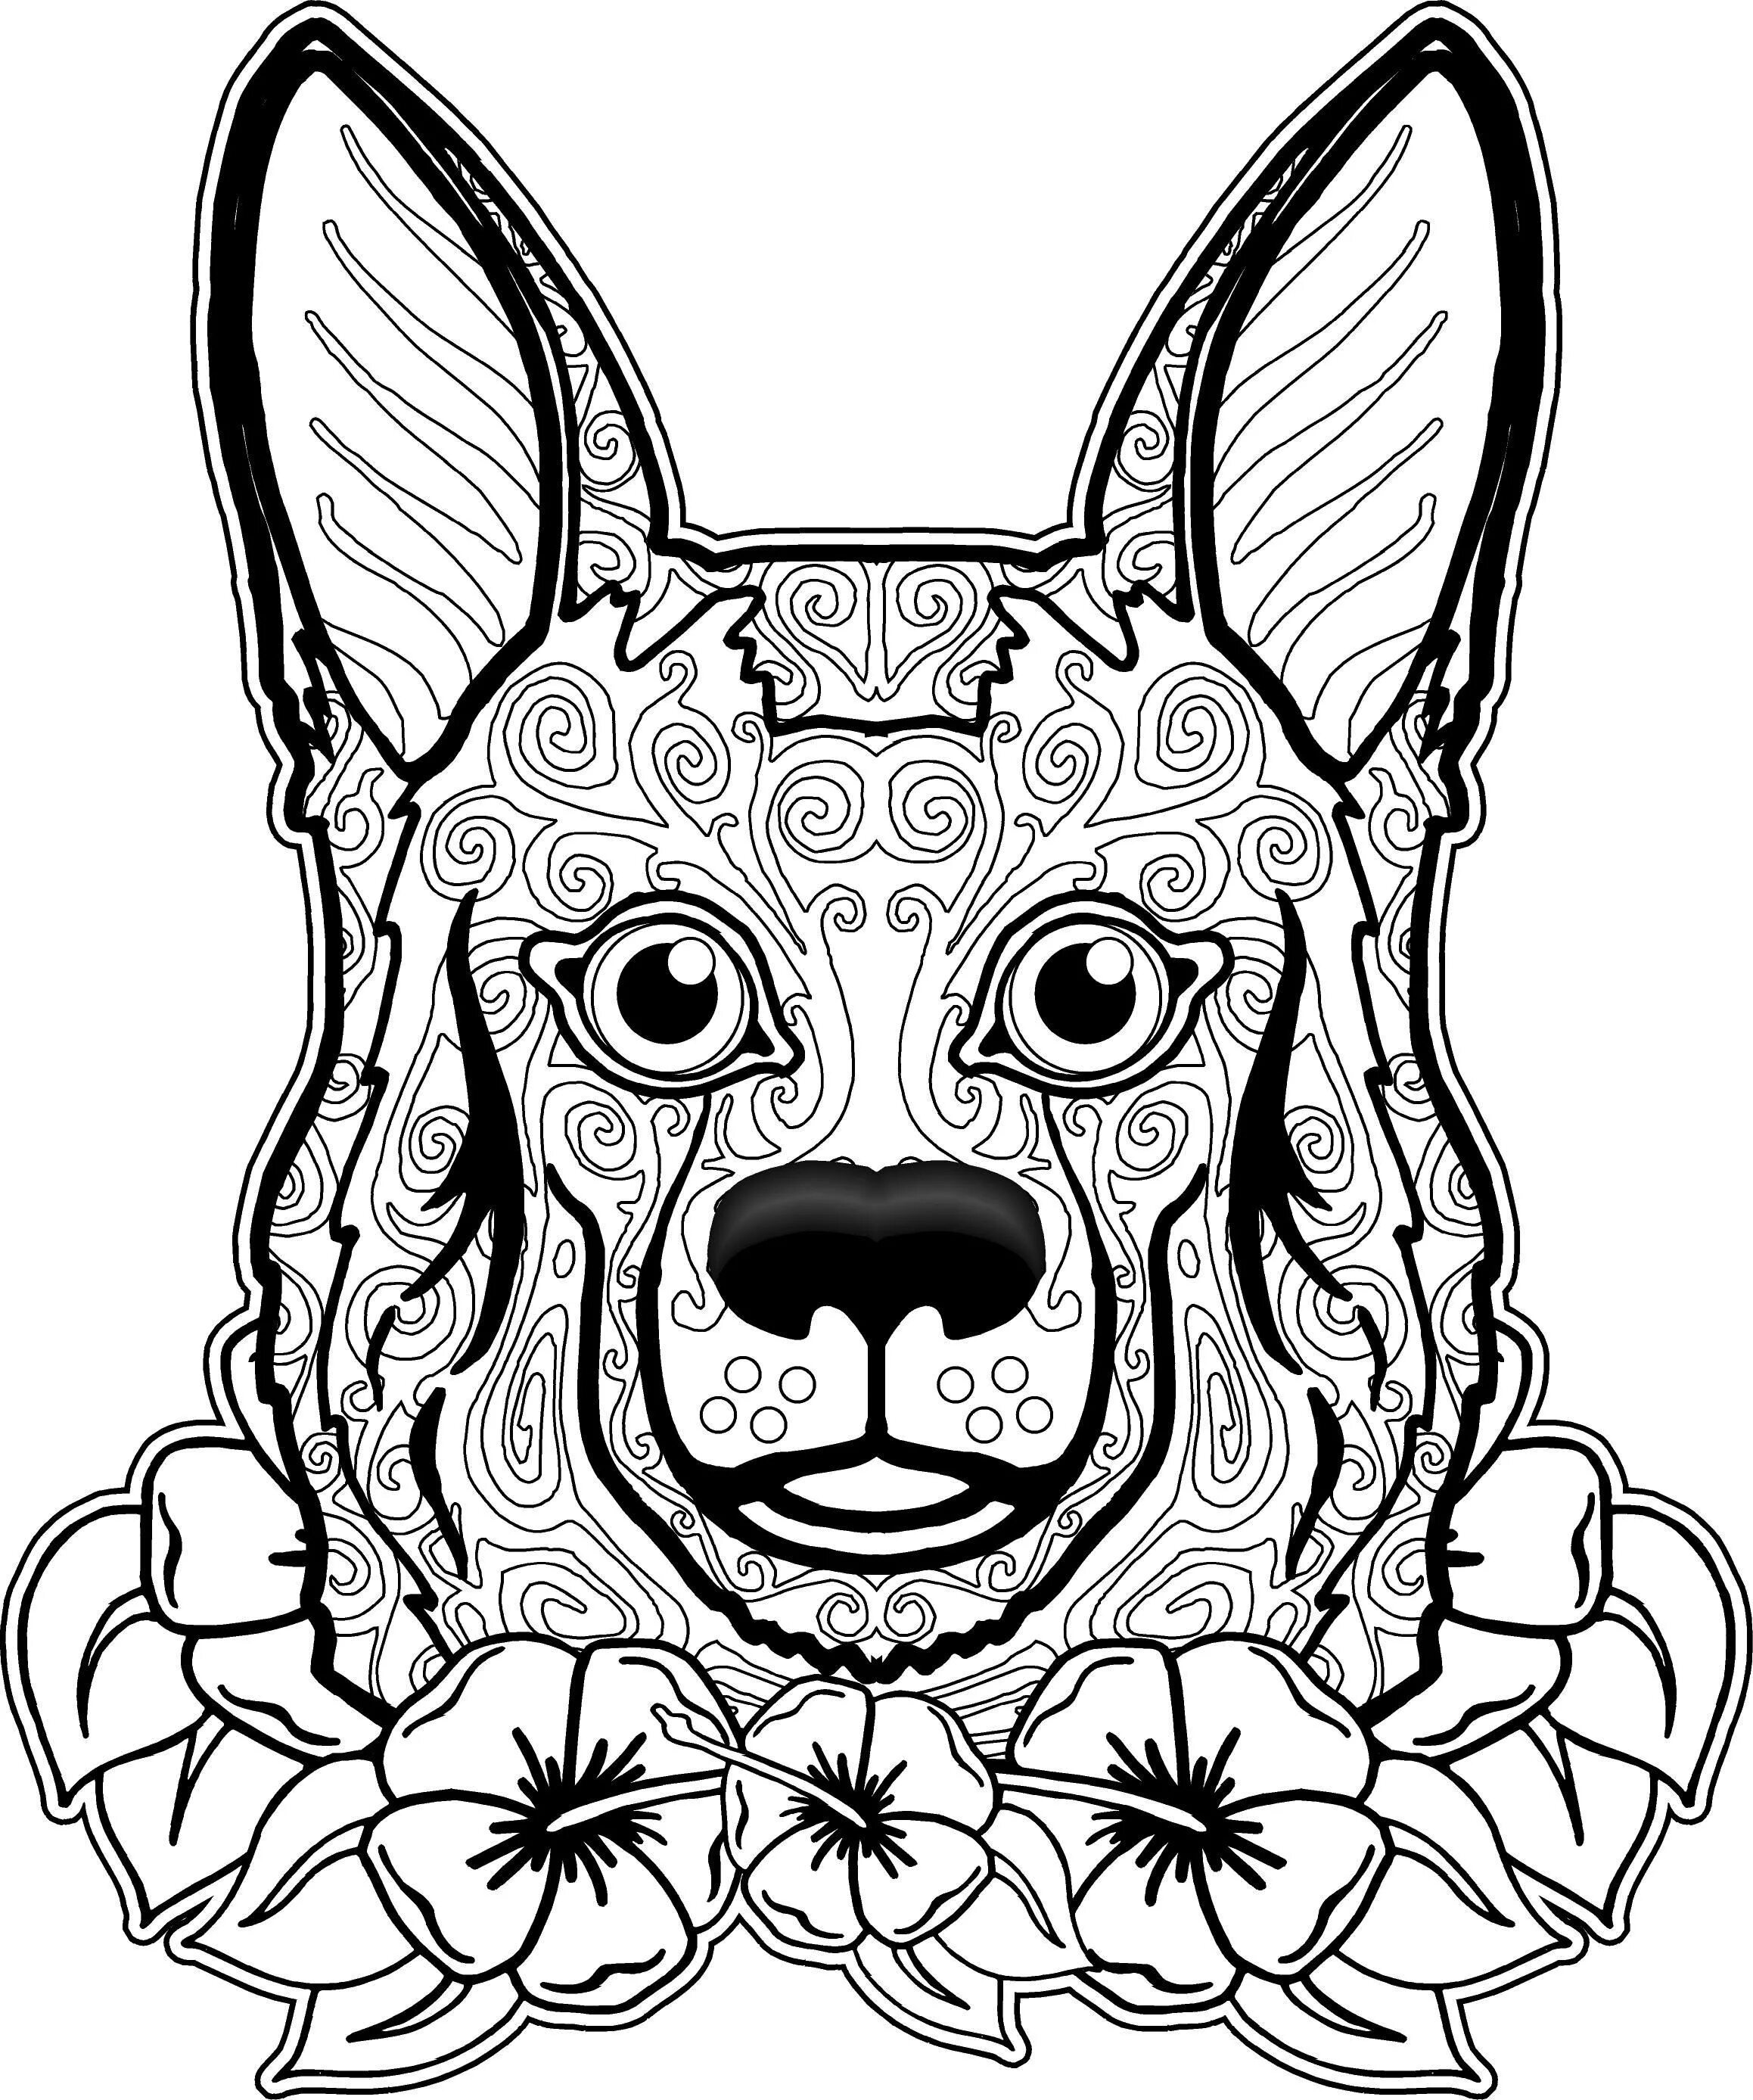 Wagging dog coloring page